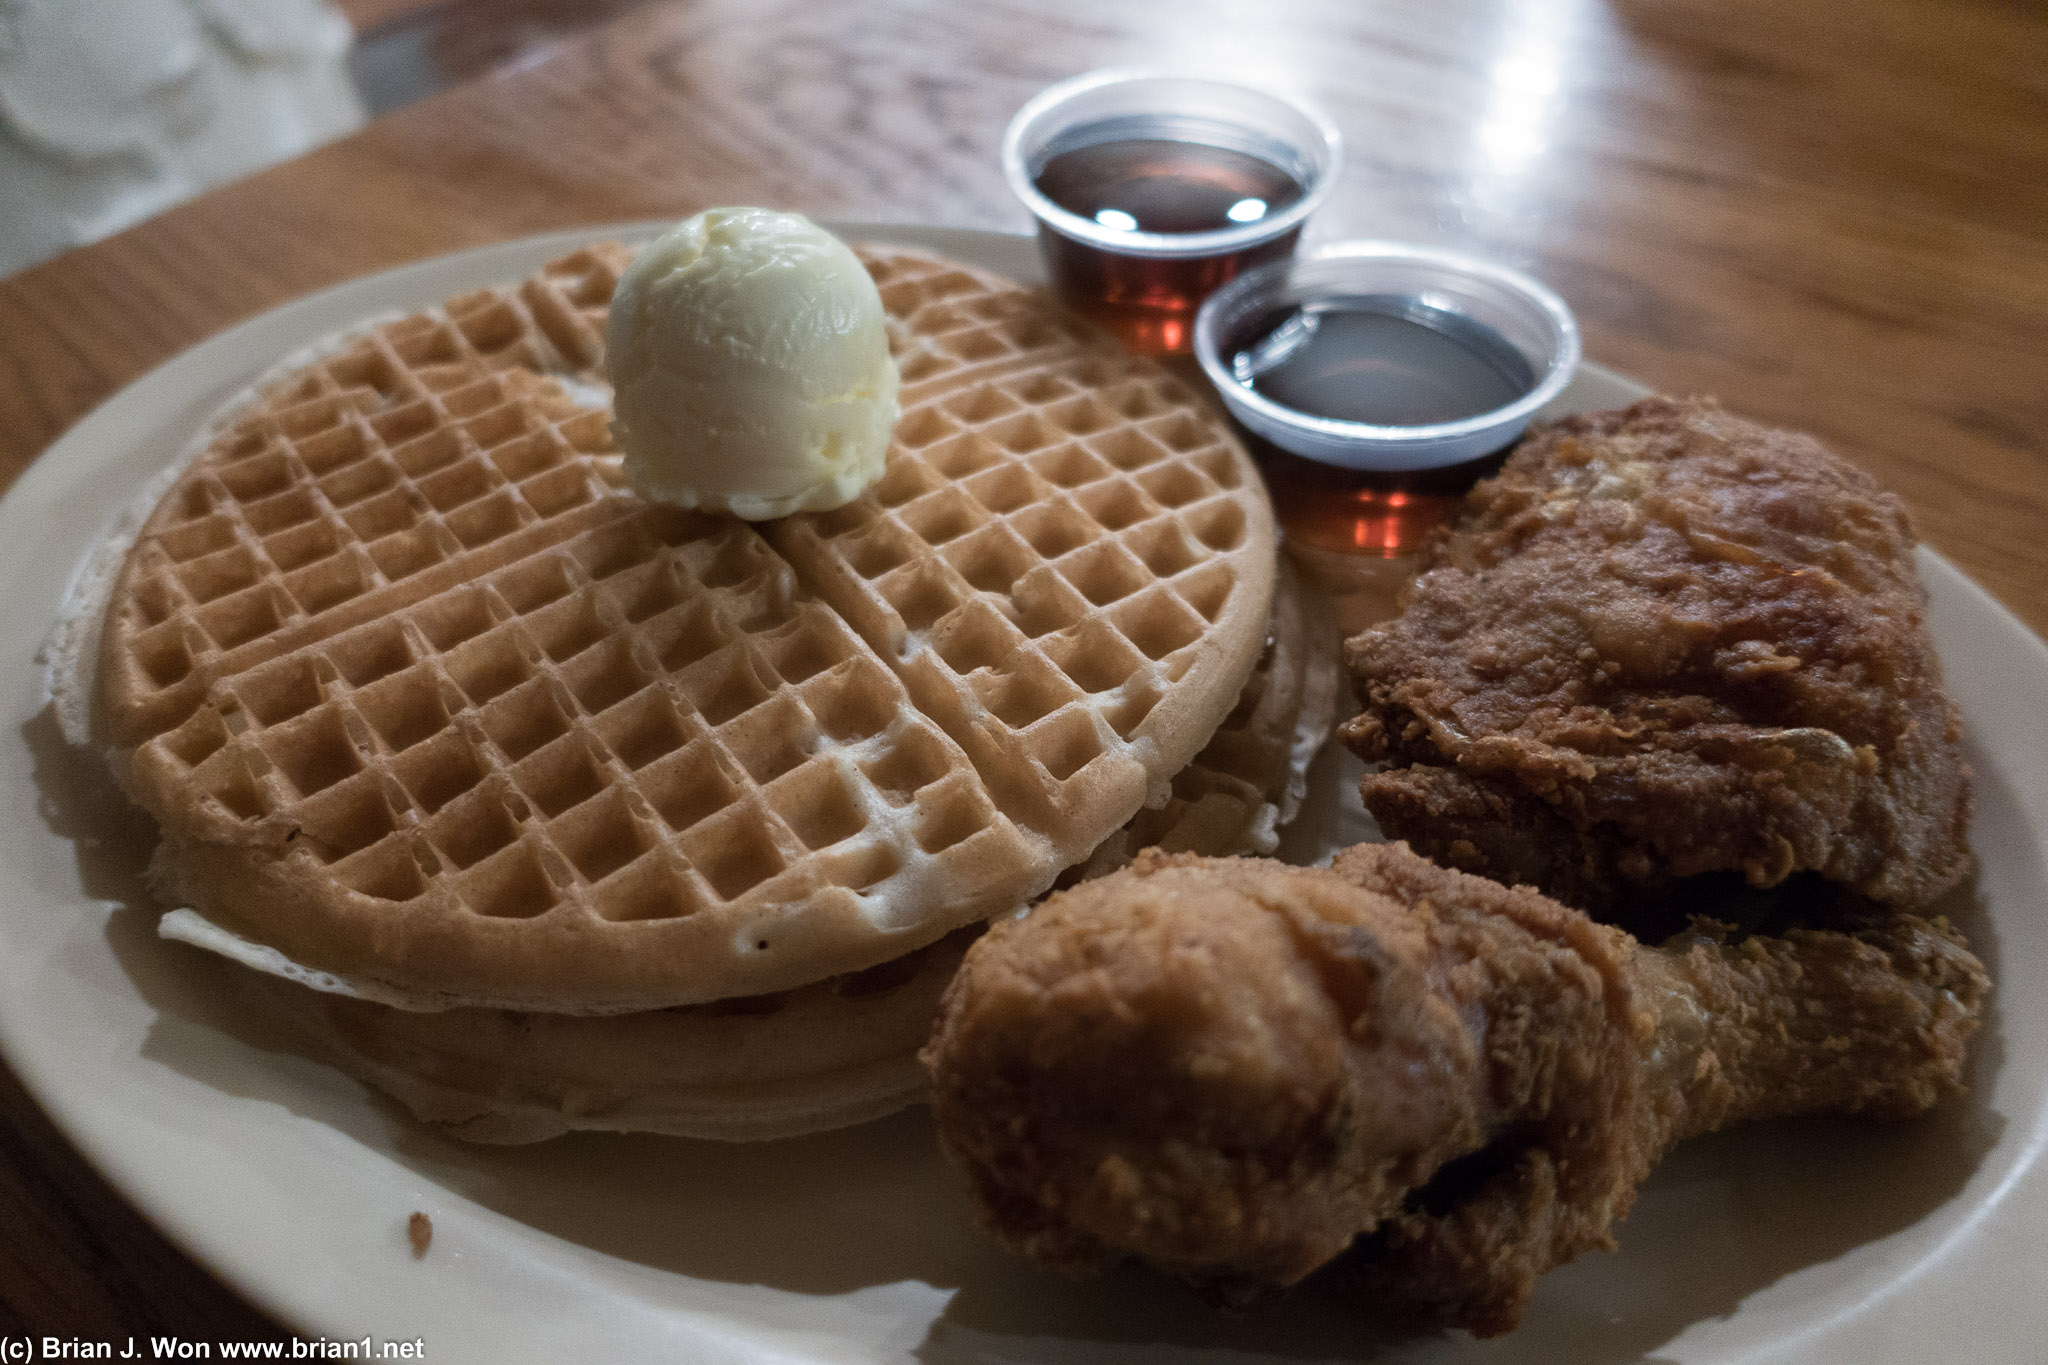 Time for chicken and waffles!